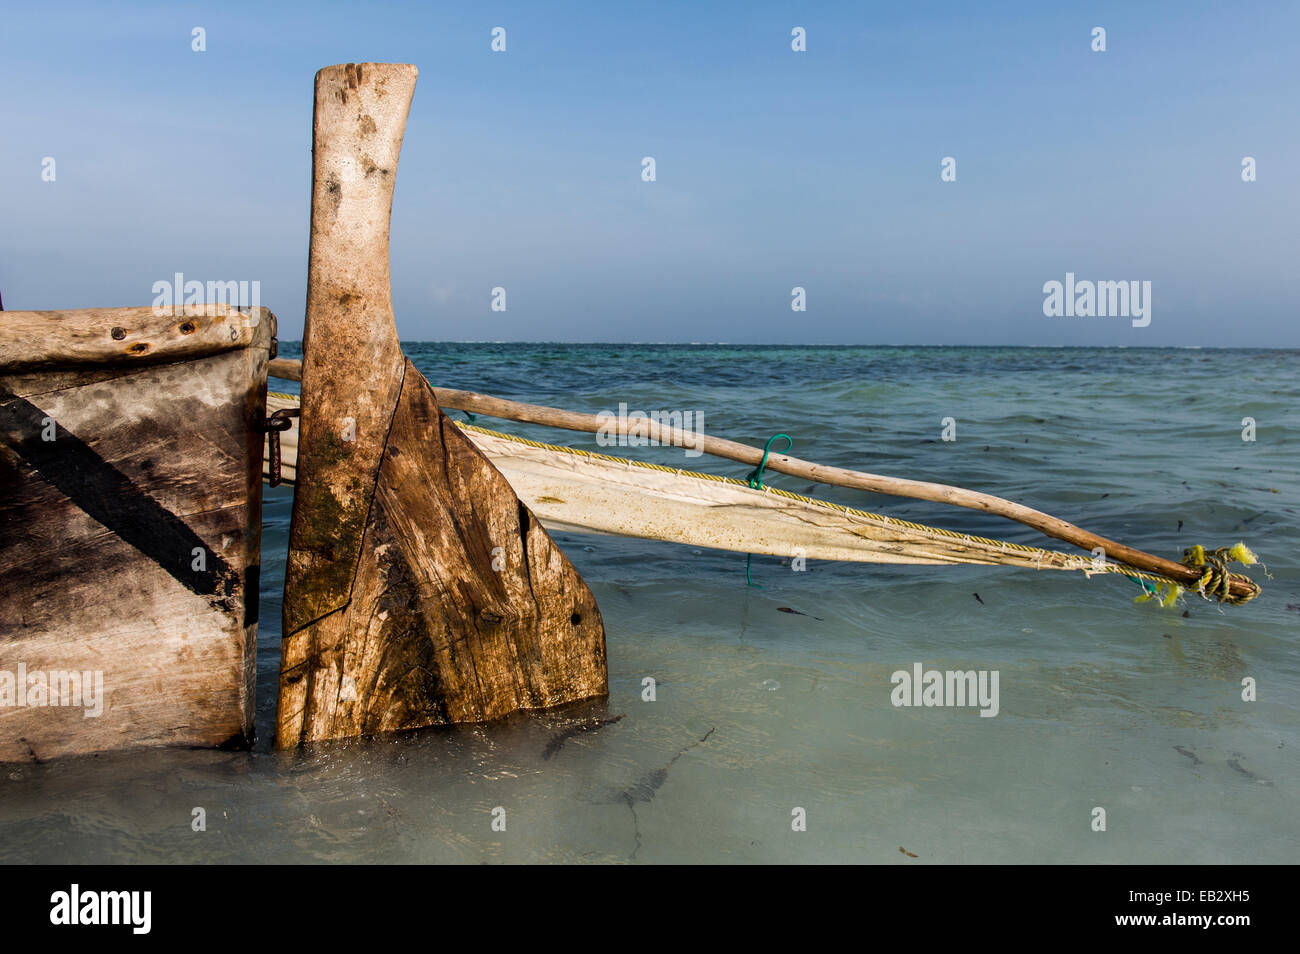 The carved timber rudder, mast and tarpaulin sail of a wooden trimaran fishing dhow moored in the shallows. Stock Photo